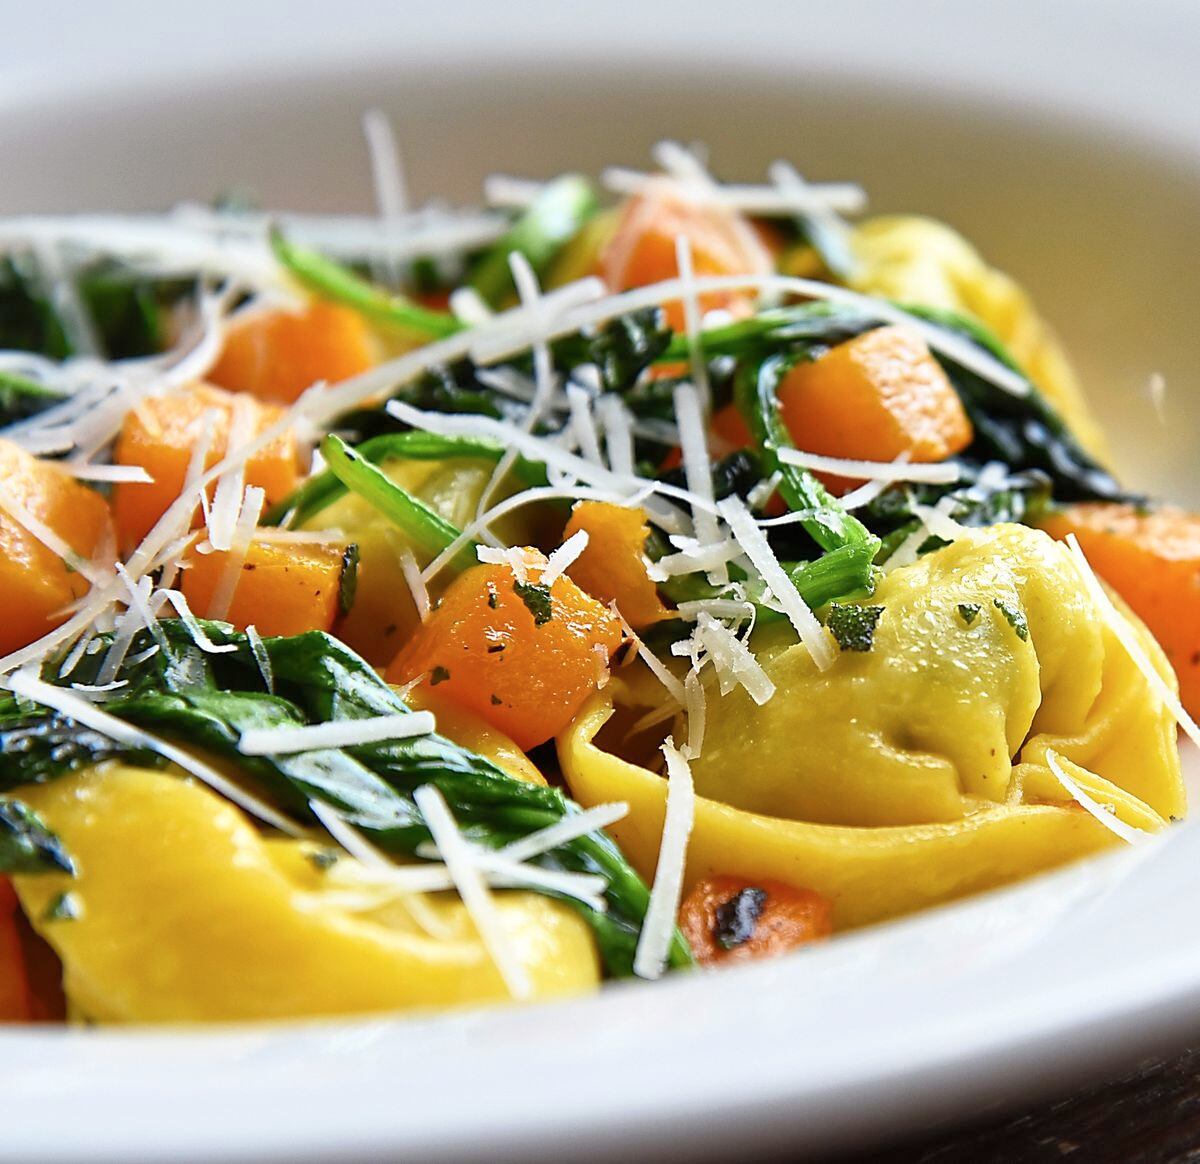 Don’t pass on the pasta – tortellini with squash